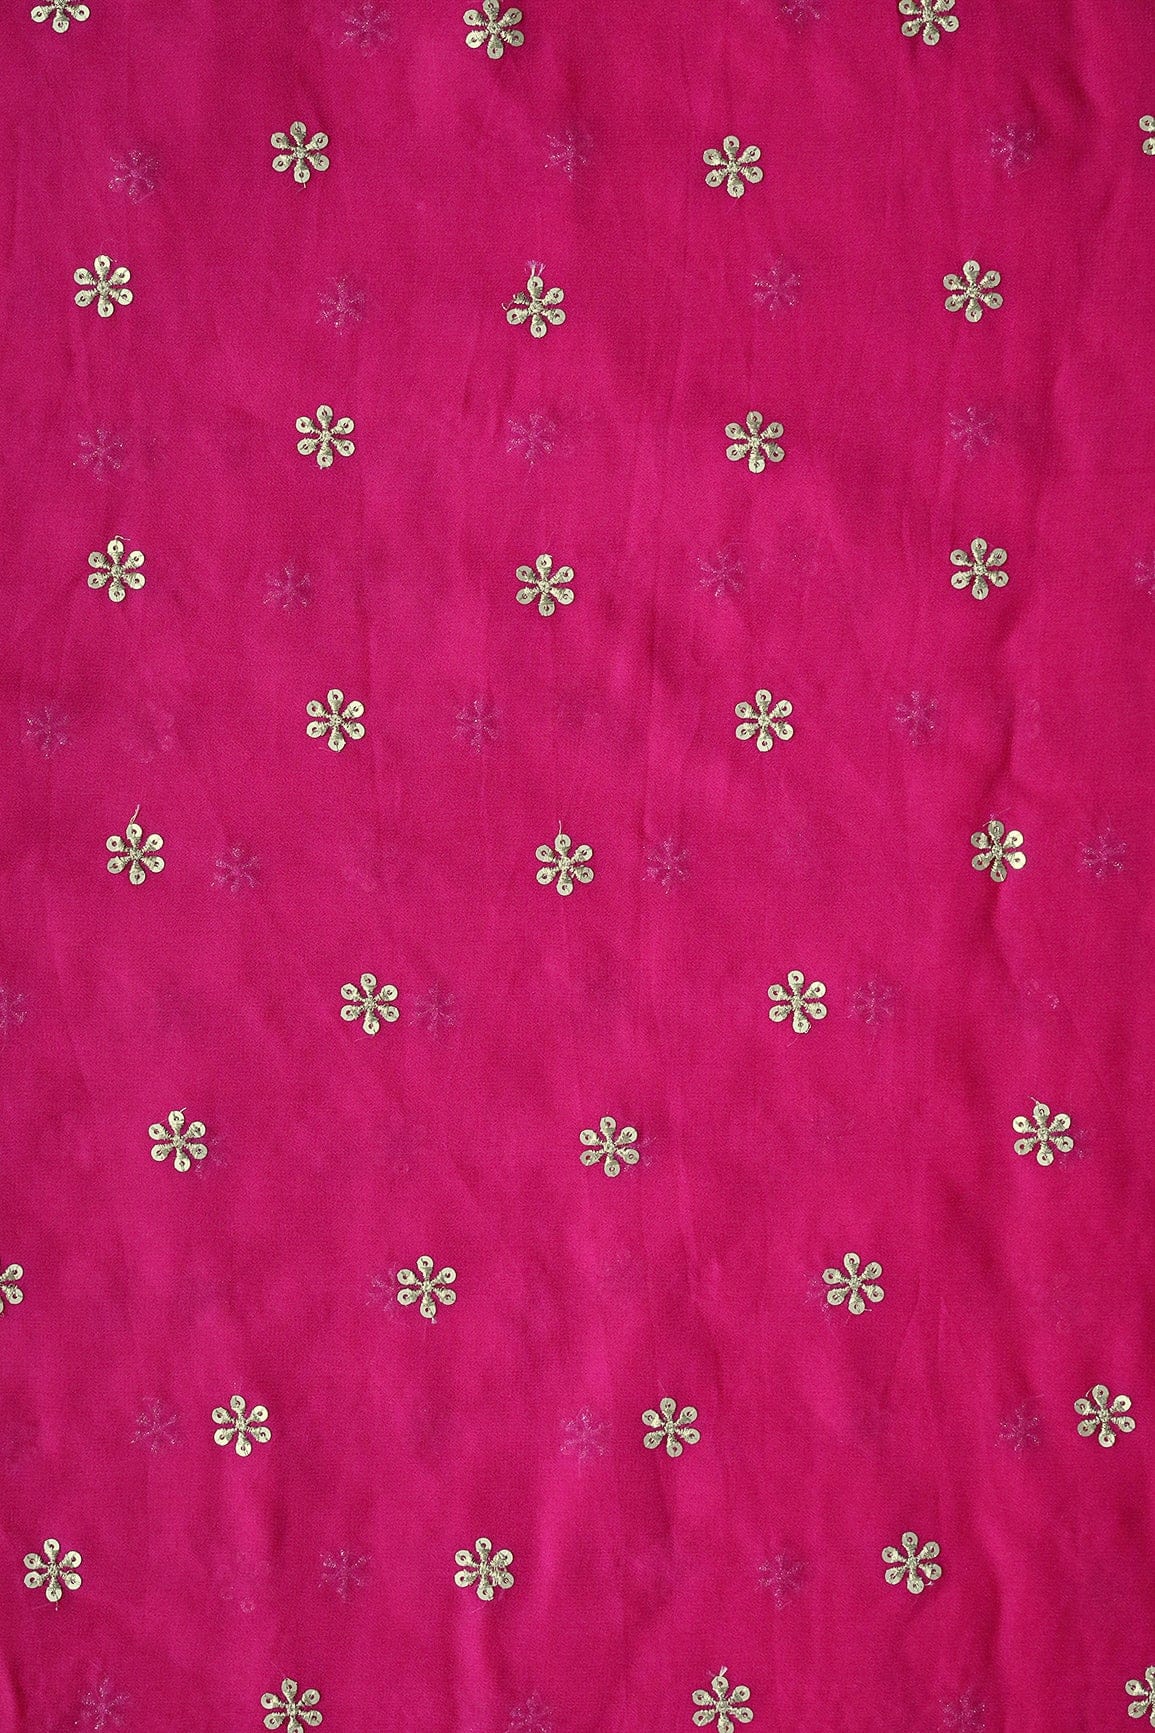 doeraa Embroidery Fabrics Gold Sequins With Gold Zari Beautiful Small Motif Embroidery On Fuchsia Viscose Georgette Fabric